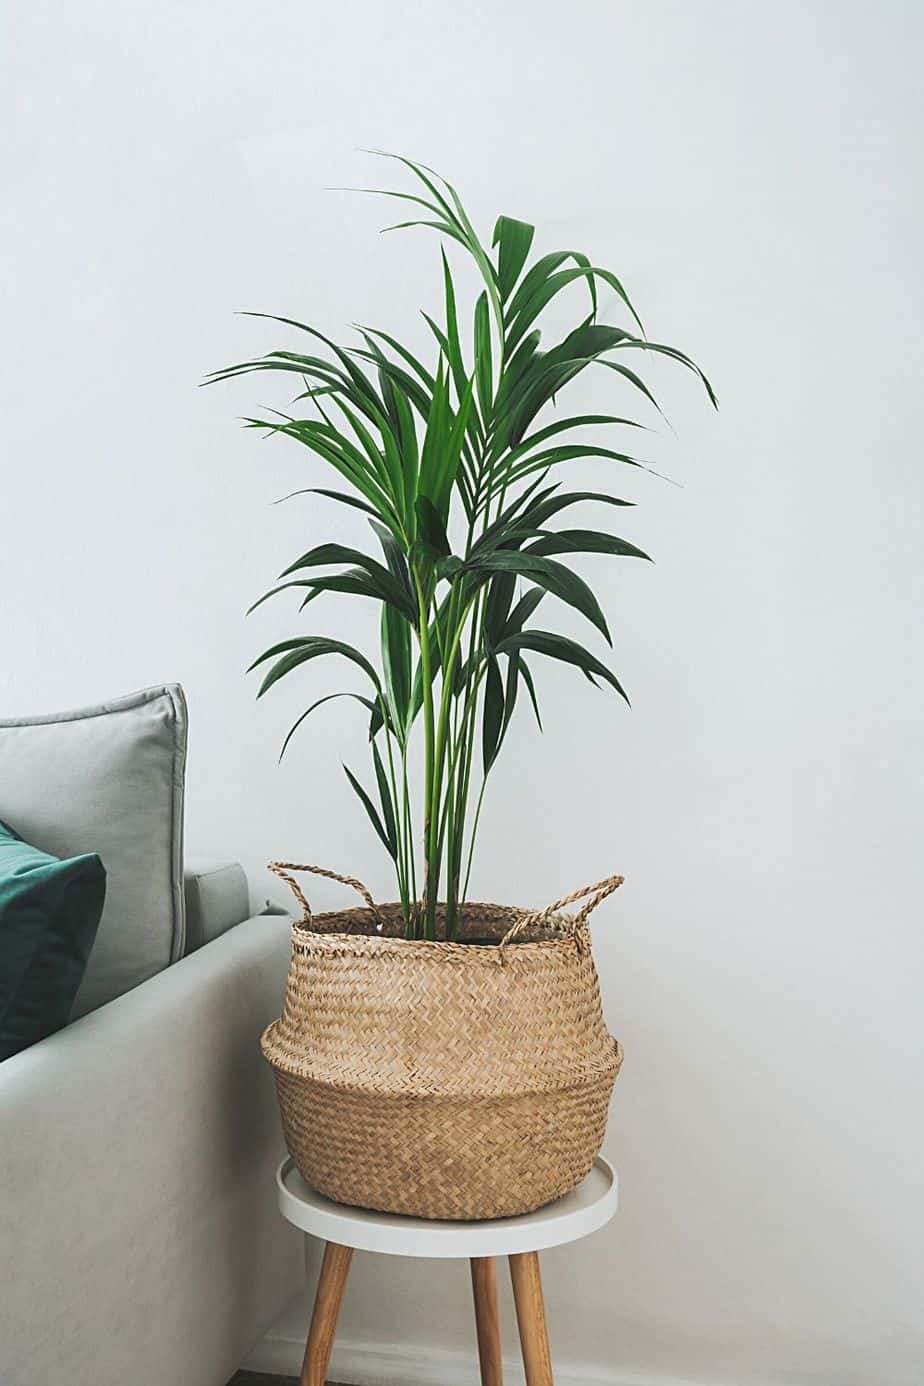 Another low-light thriving plant that you can place by your northwest-facing window is the Kentia Palm